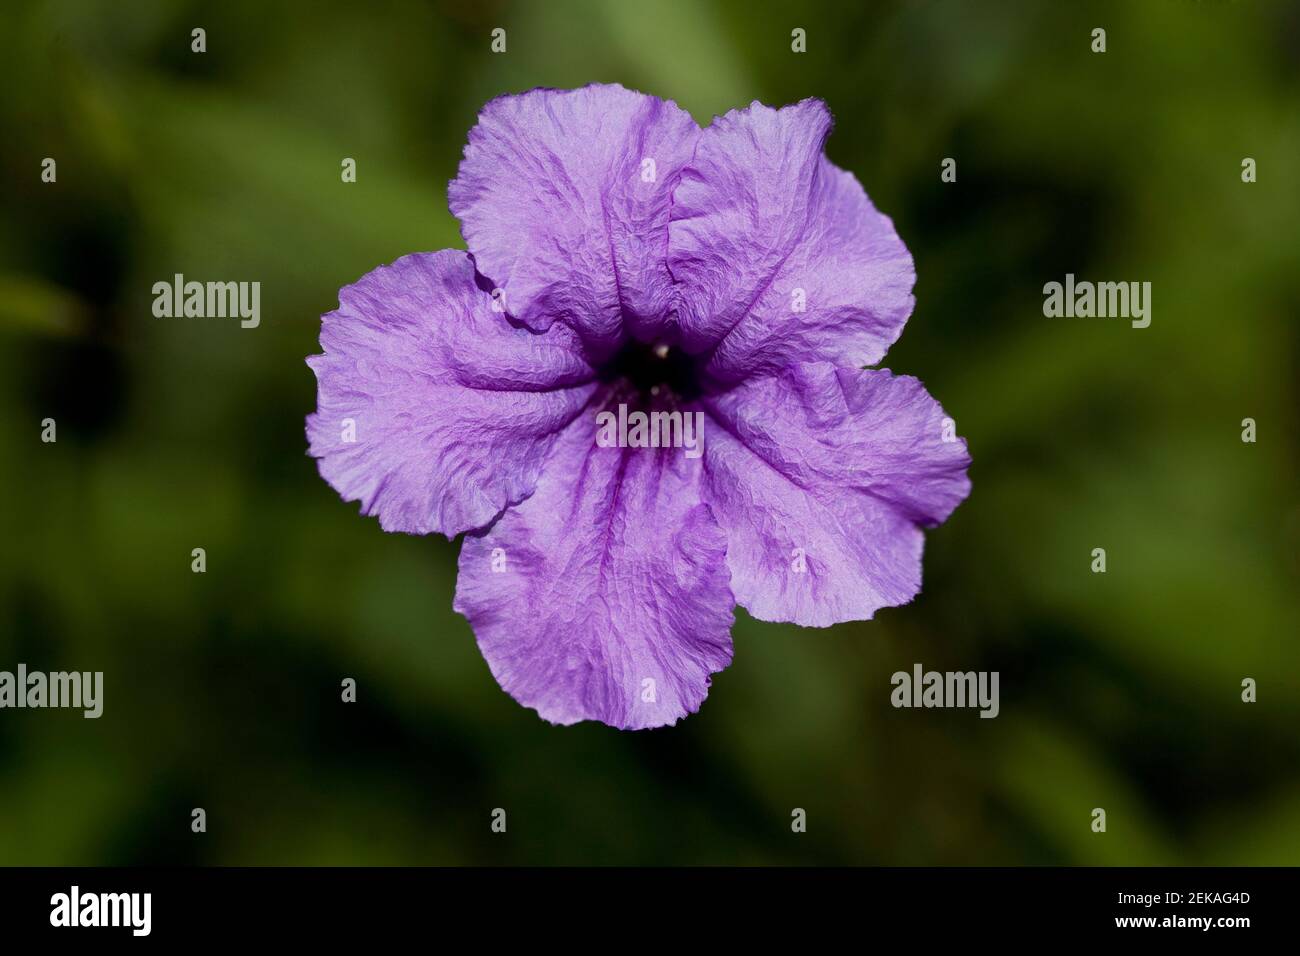 Close up of a Petunia flower Stock Photo